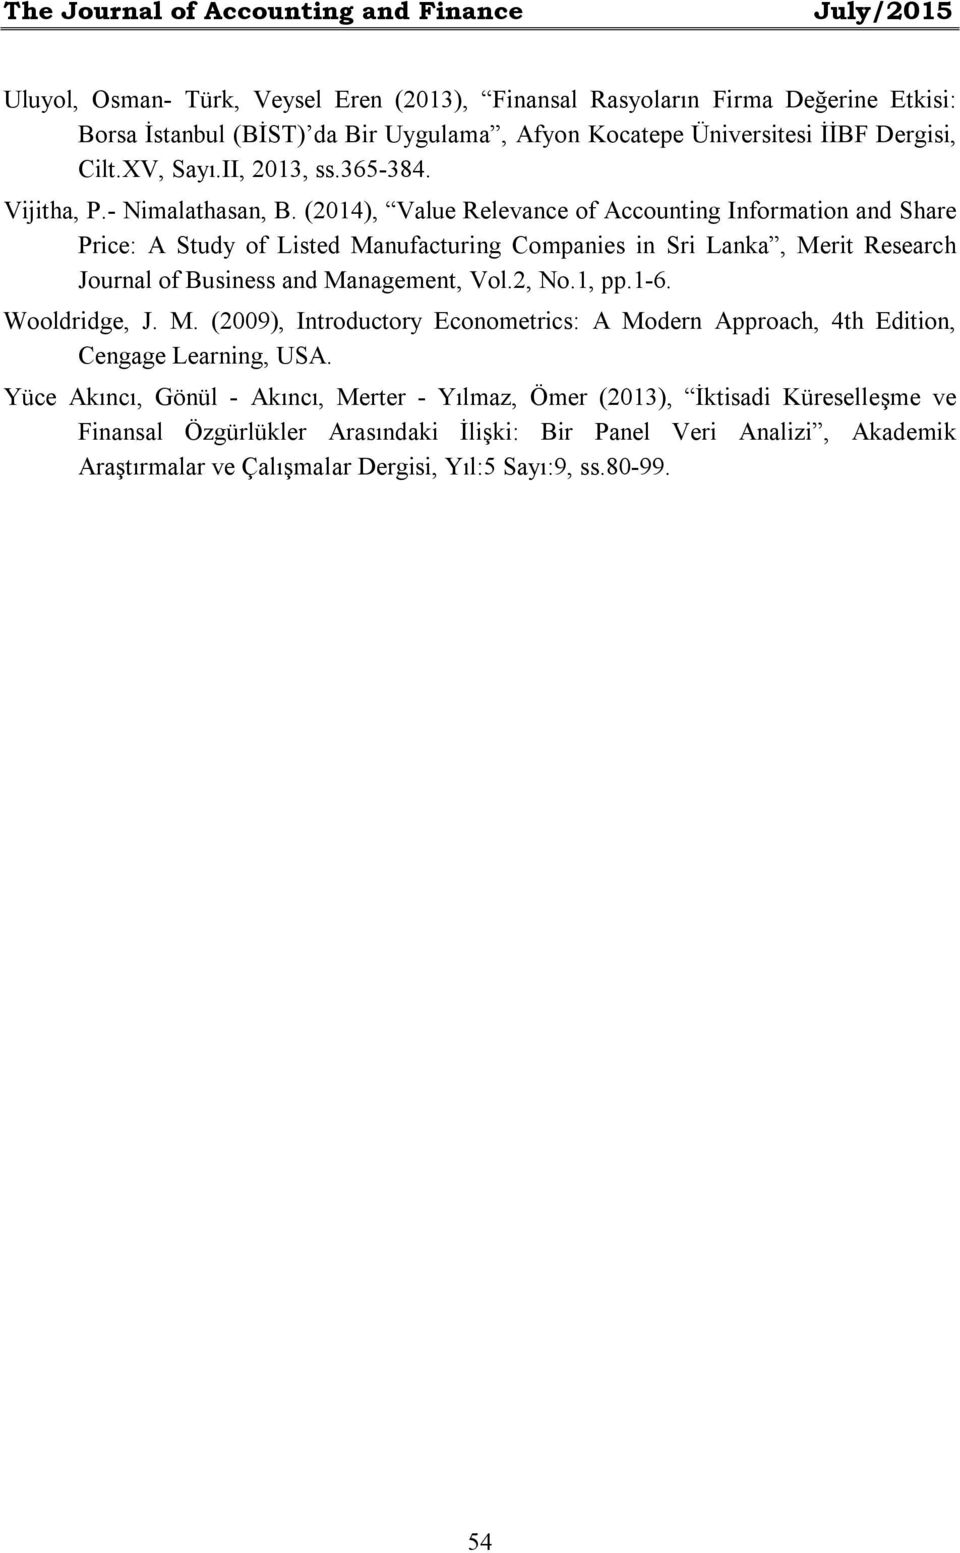 (2014), Value Relevance of Accounting Information and Share Price: A Study of Listed Manufacturing Companies in Sri Lanka, Merit Research Journal of Business and Management, Vol.2, No.1, pp.1-6.